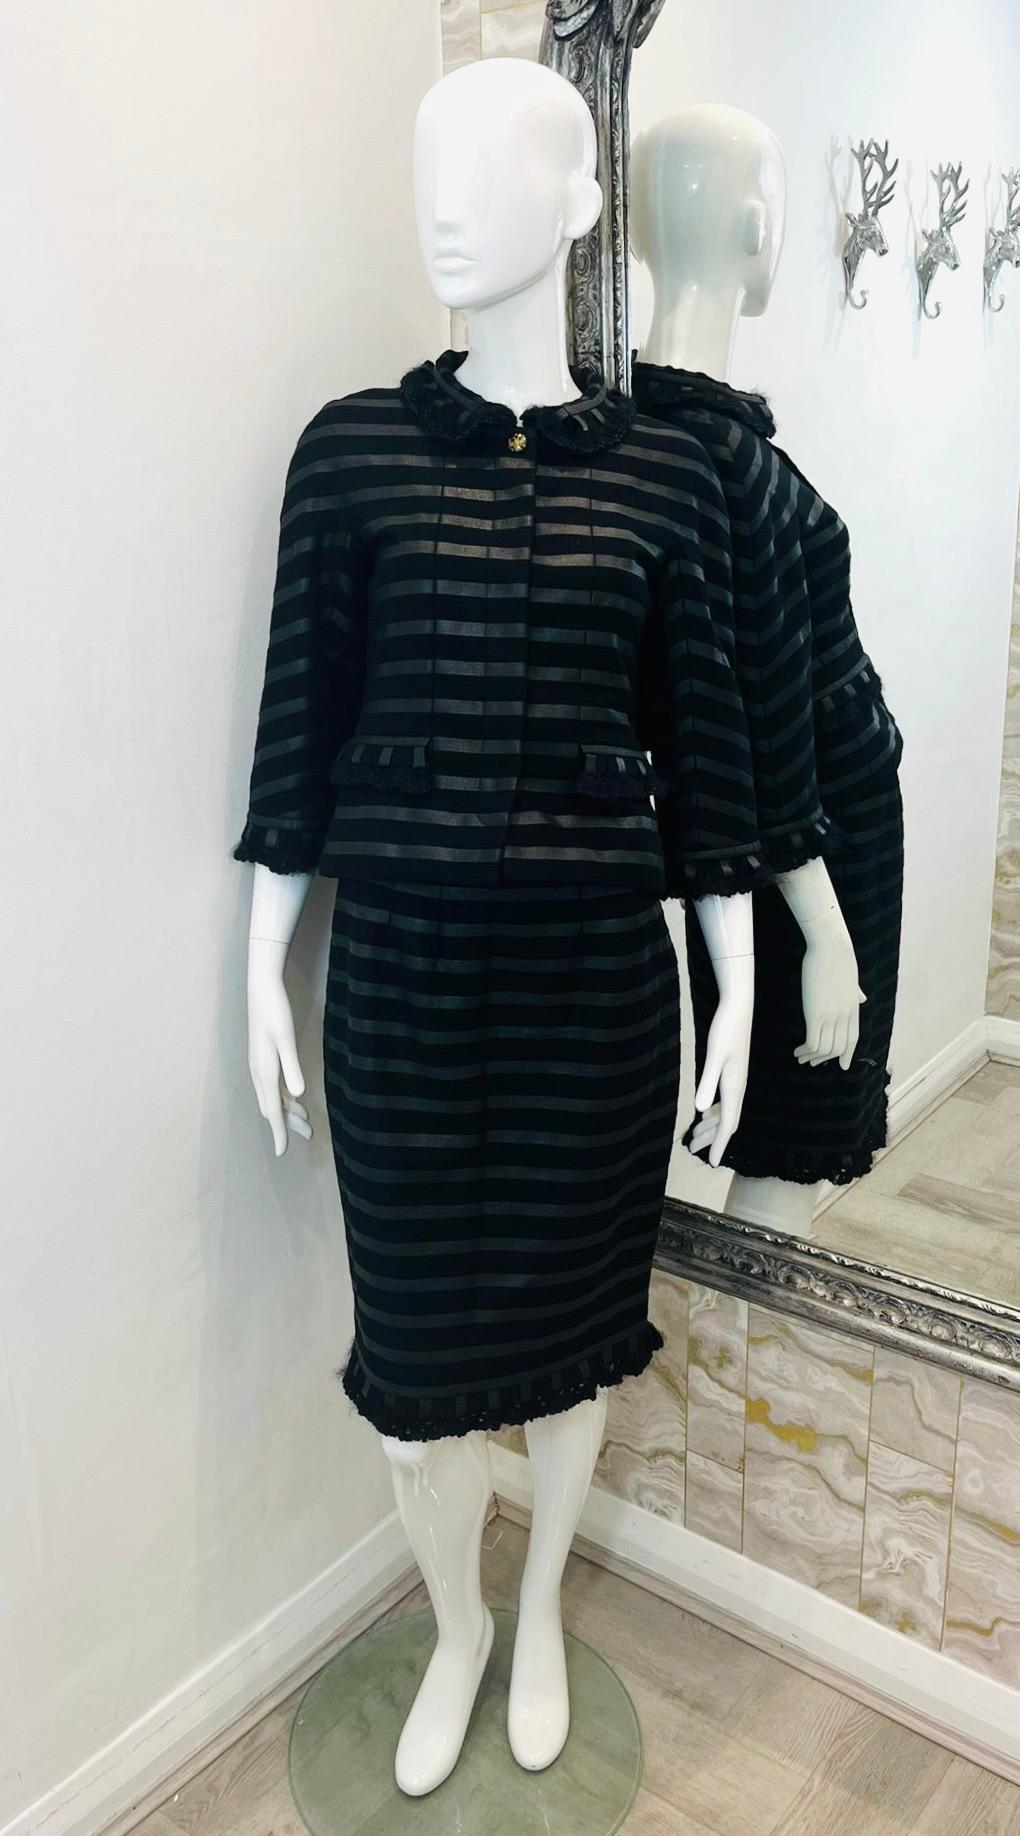 Chanel Cashmere Skirt & Jacket Suit

Black suit designed with dark silver, horizontal stripe pattern and ruffle trim details.

Cropped jacket styled with three-quarter sleeves, collared neckline and gold 'CC' logo Eagle button.

Featuring hidden